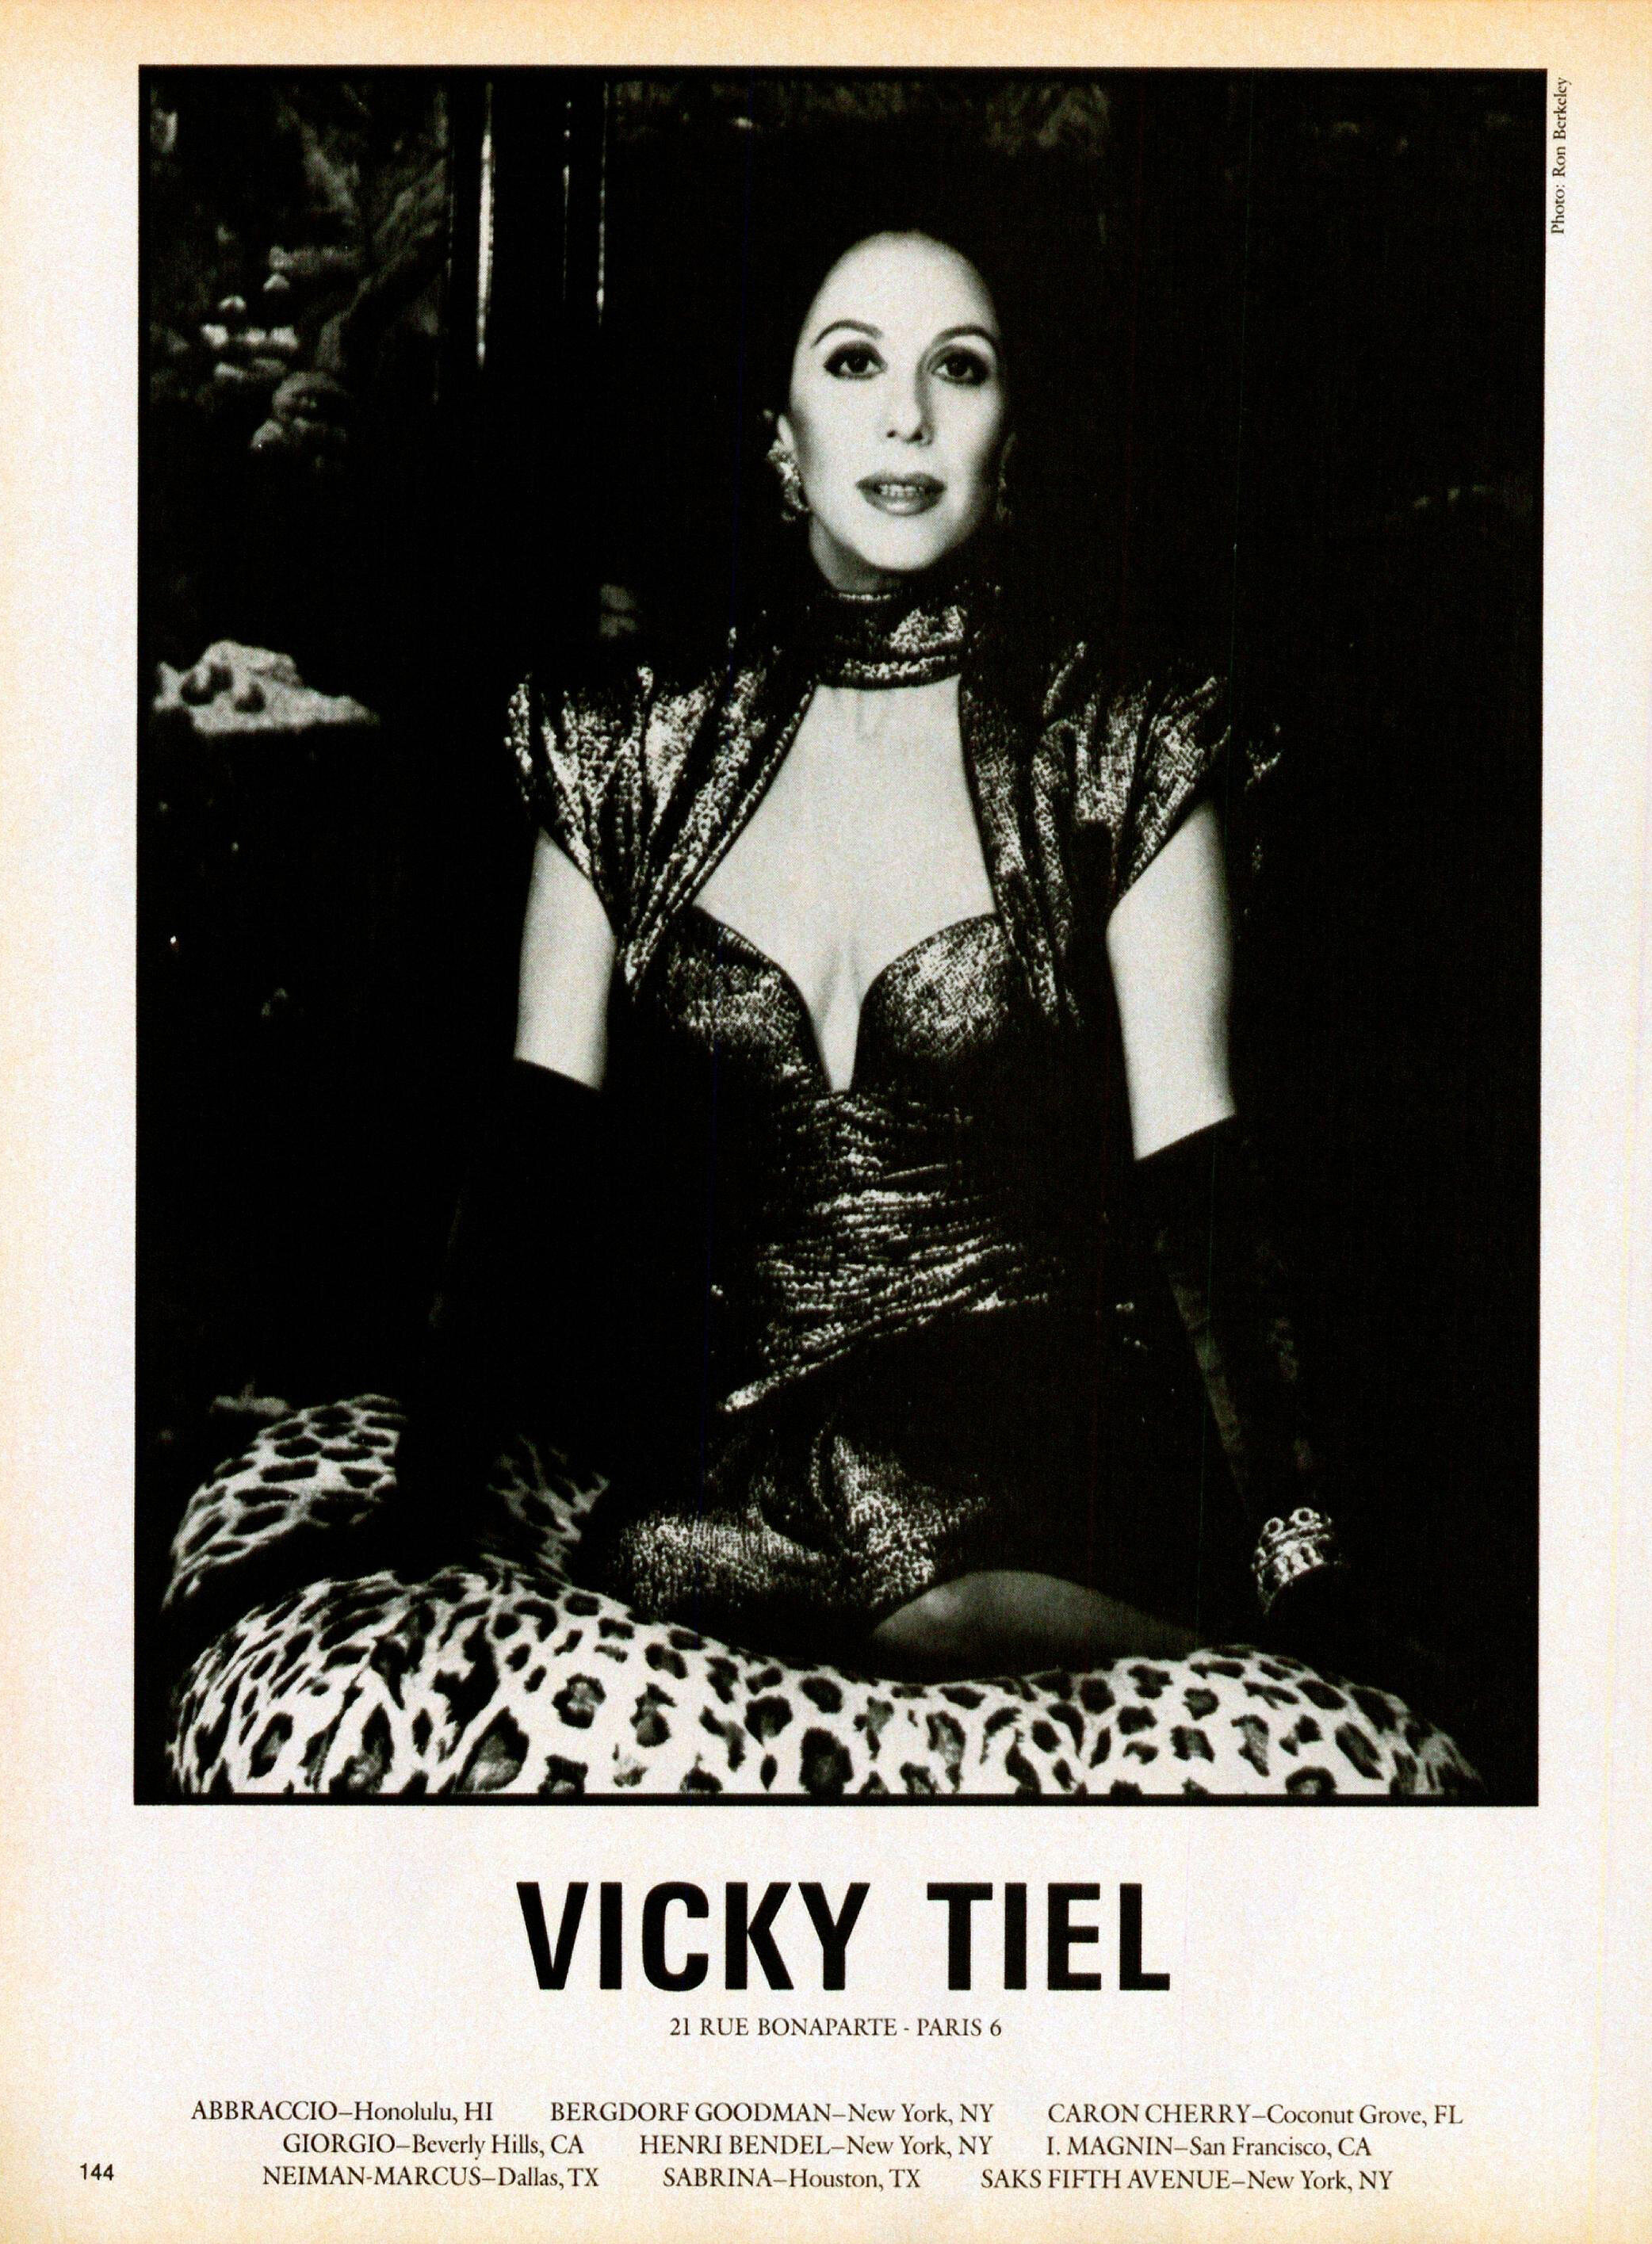 The same dress on Vicky Tiel in an ad from 1985.